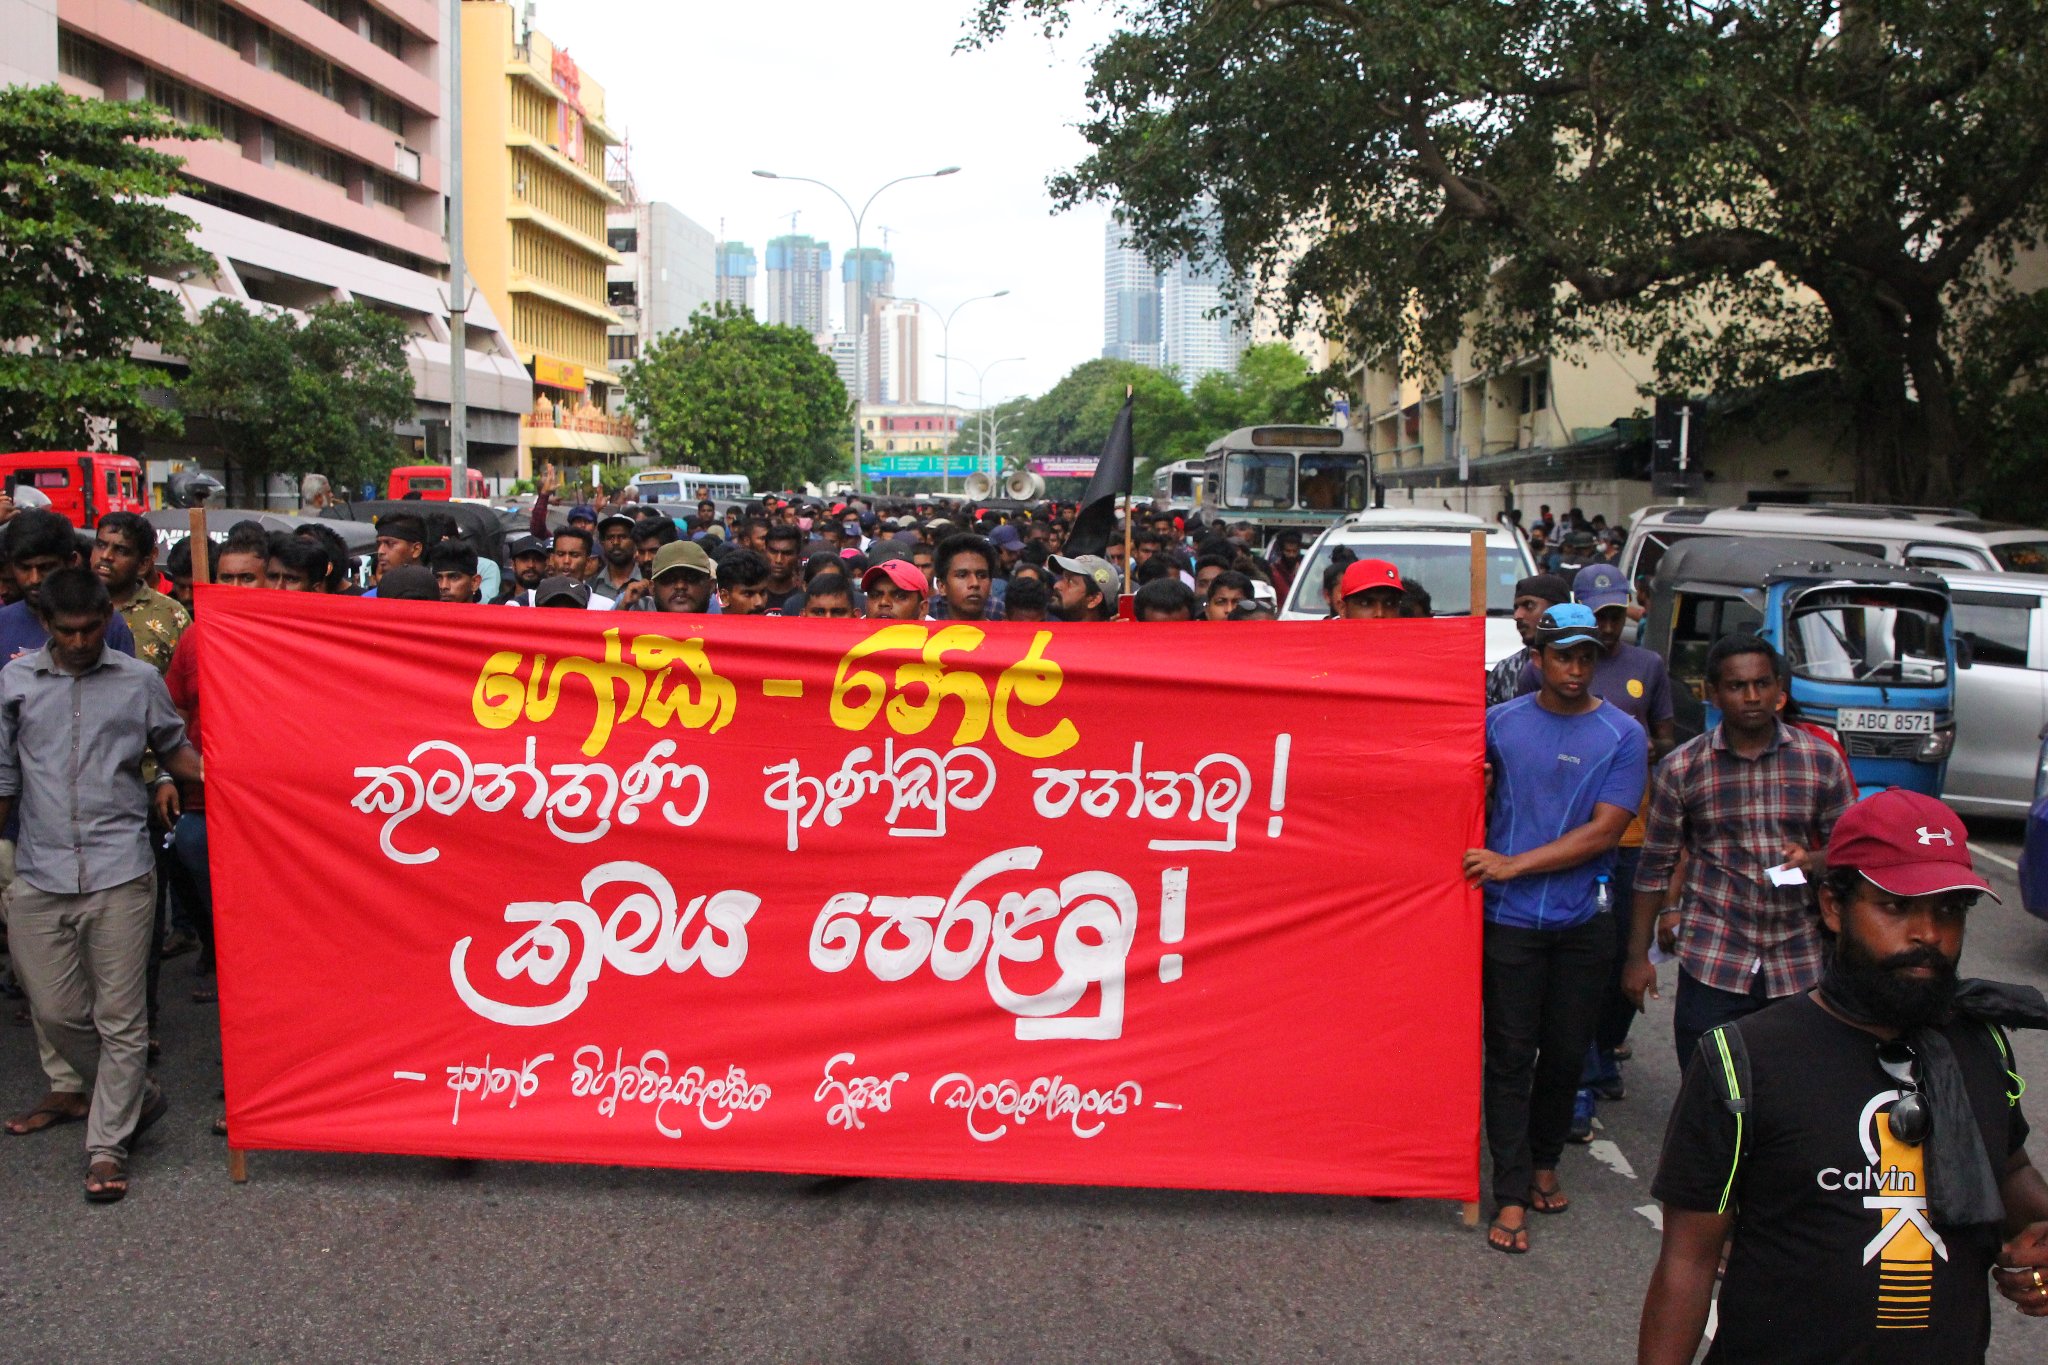 University Students Massive Protest March in Colombo #July8th to support #July9th